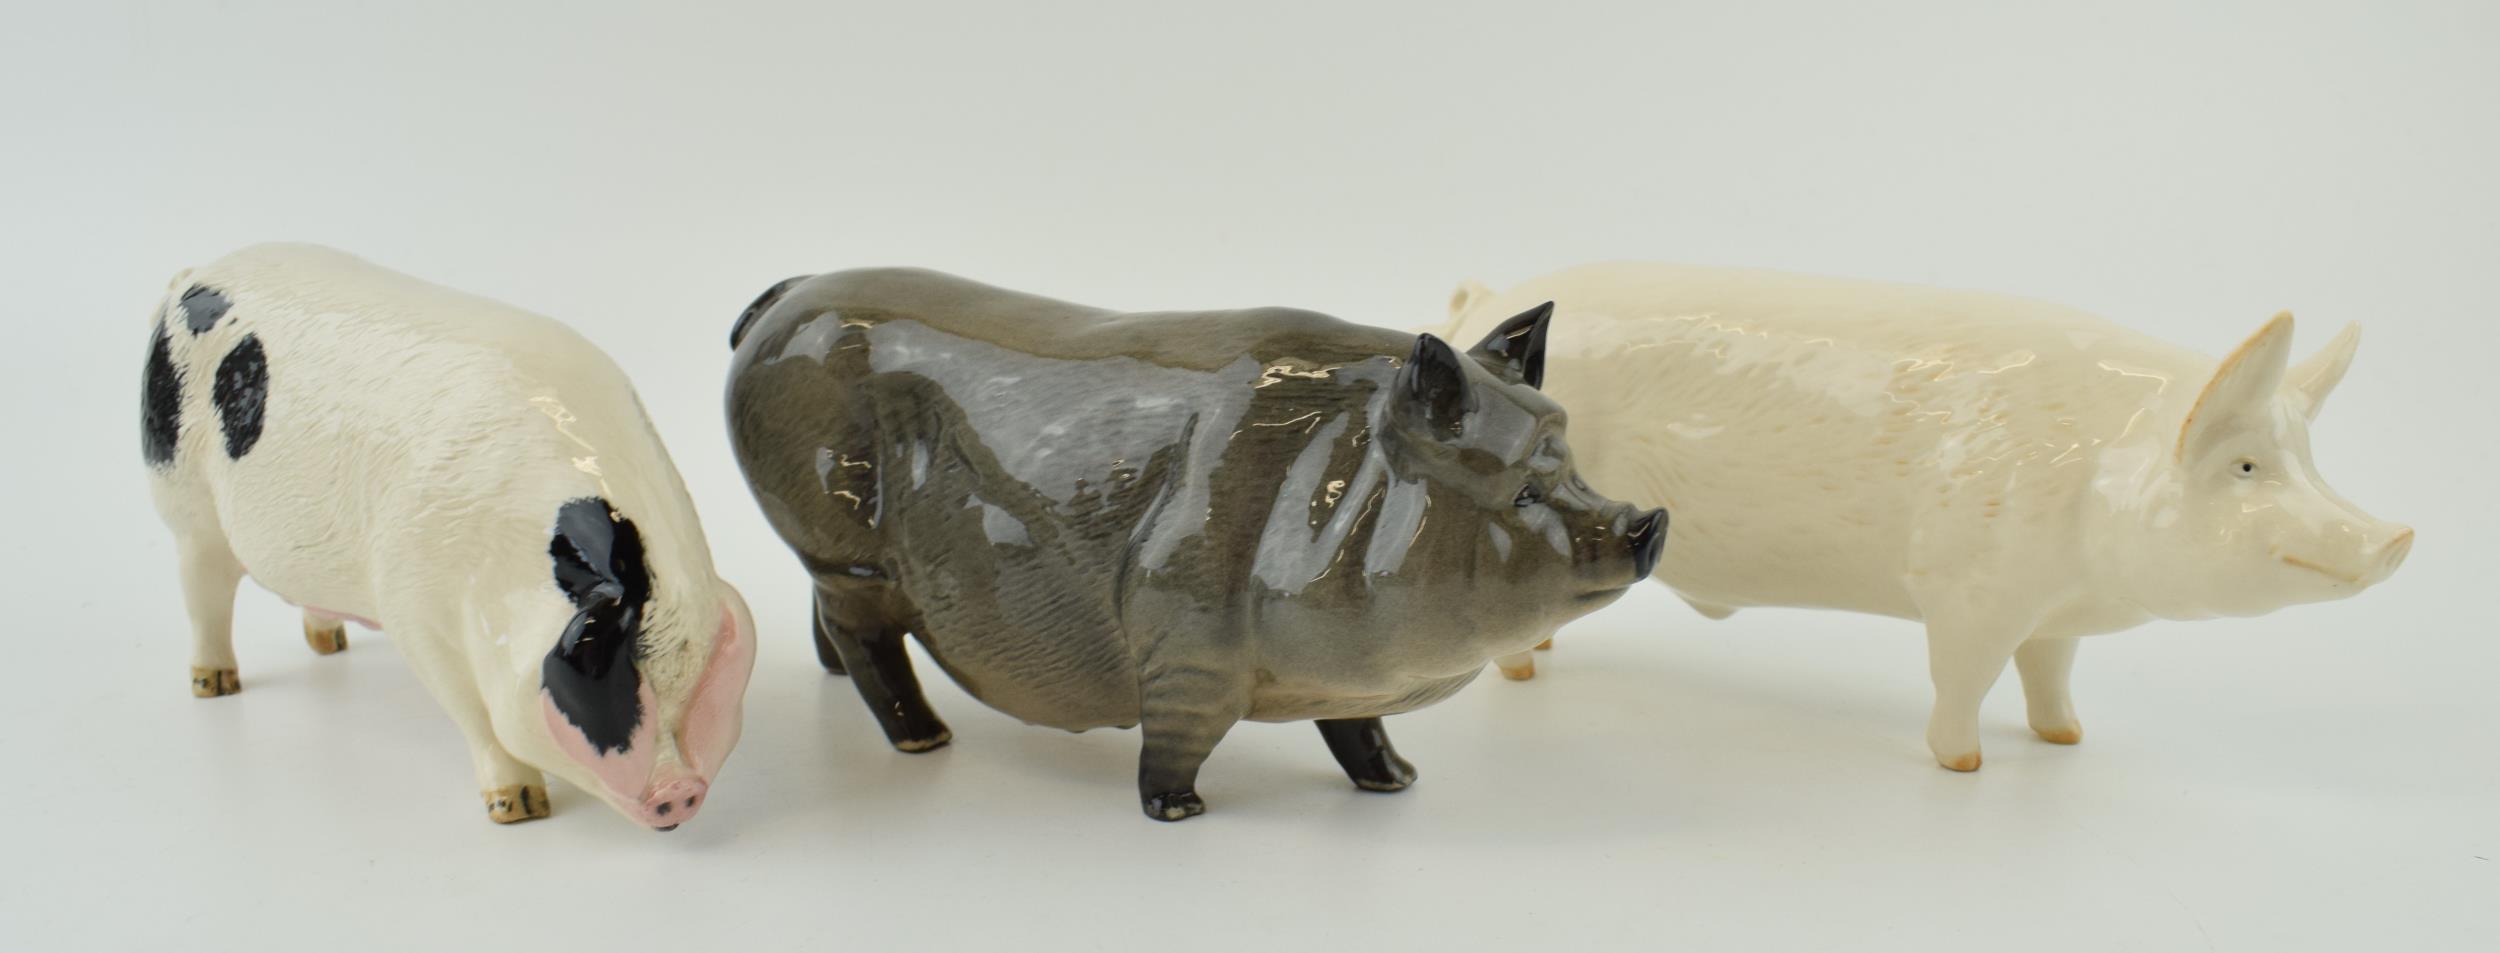 A trio of Royal Doulton pigs to include the Vietnamese Pot Bellied pig, a White Boar and a